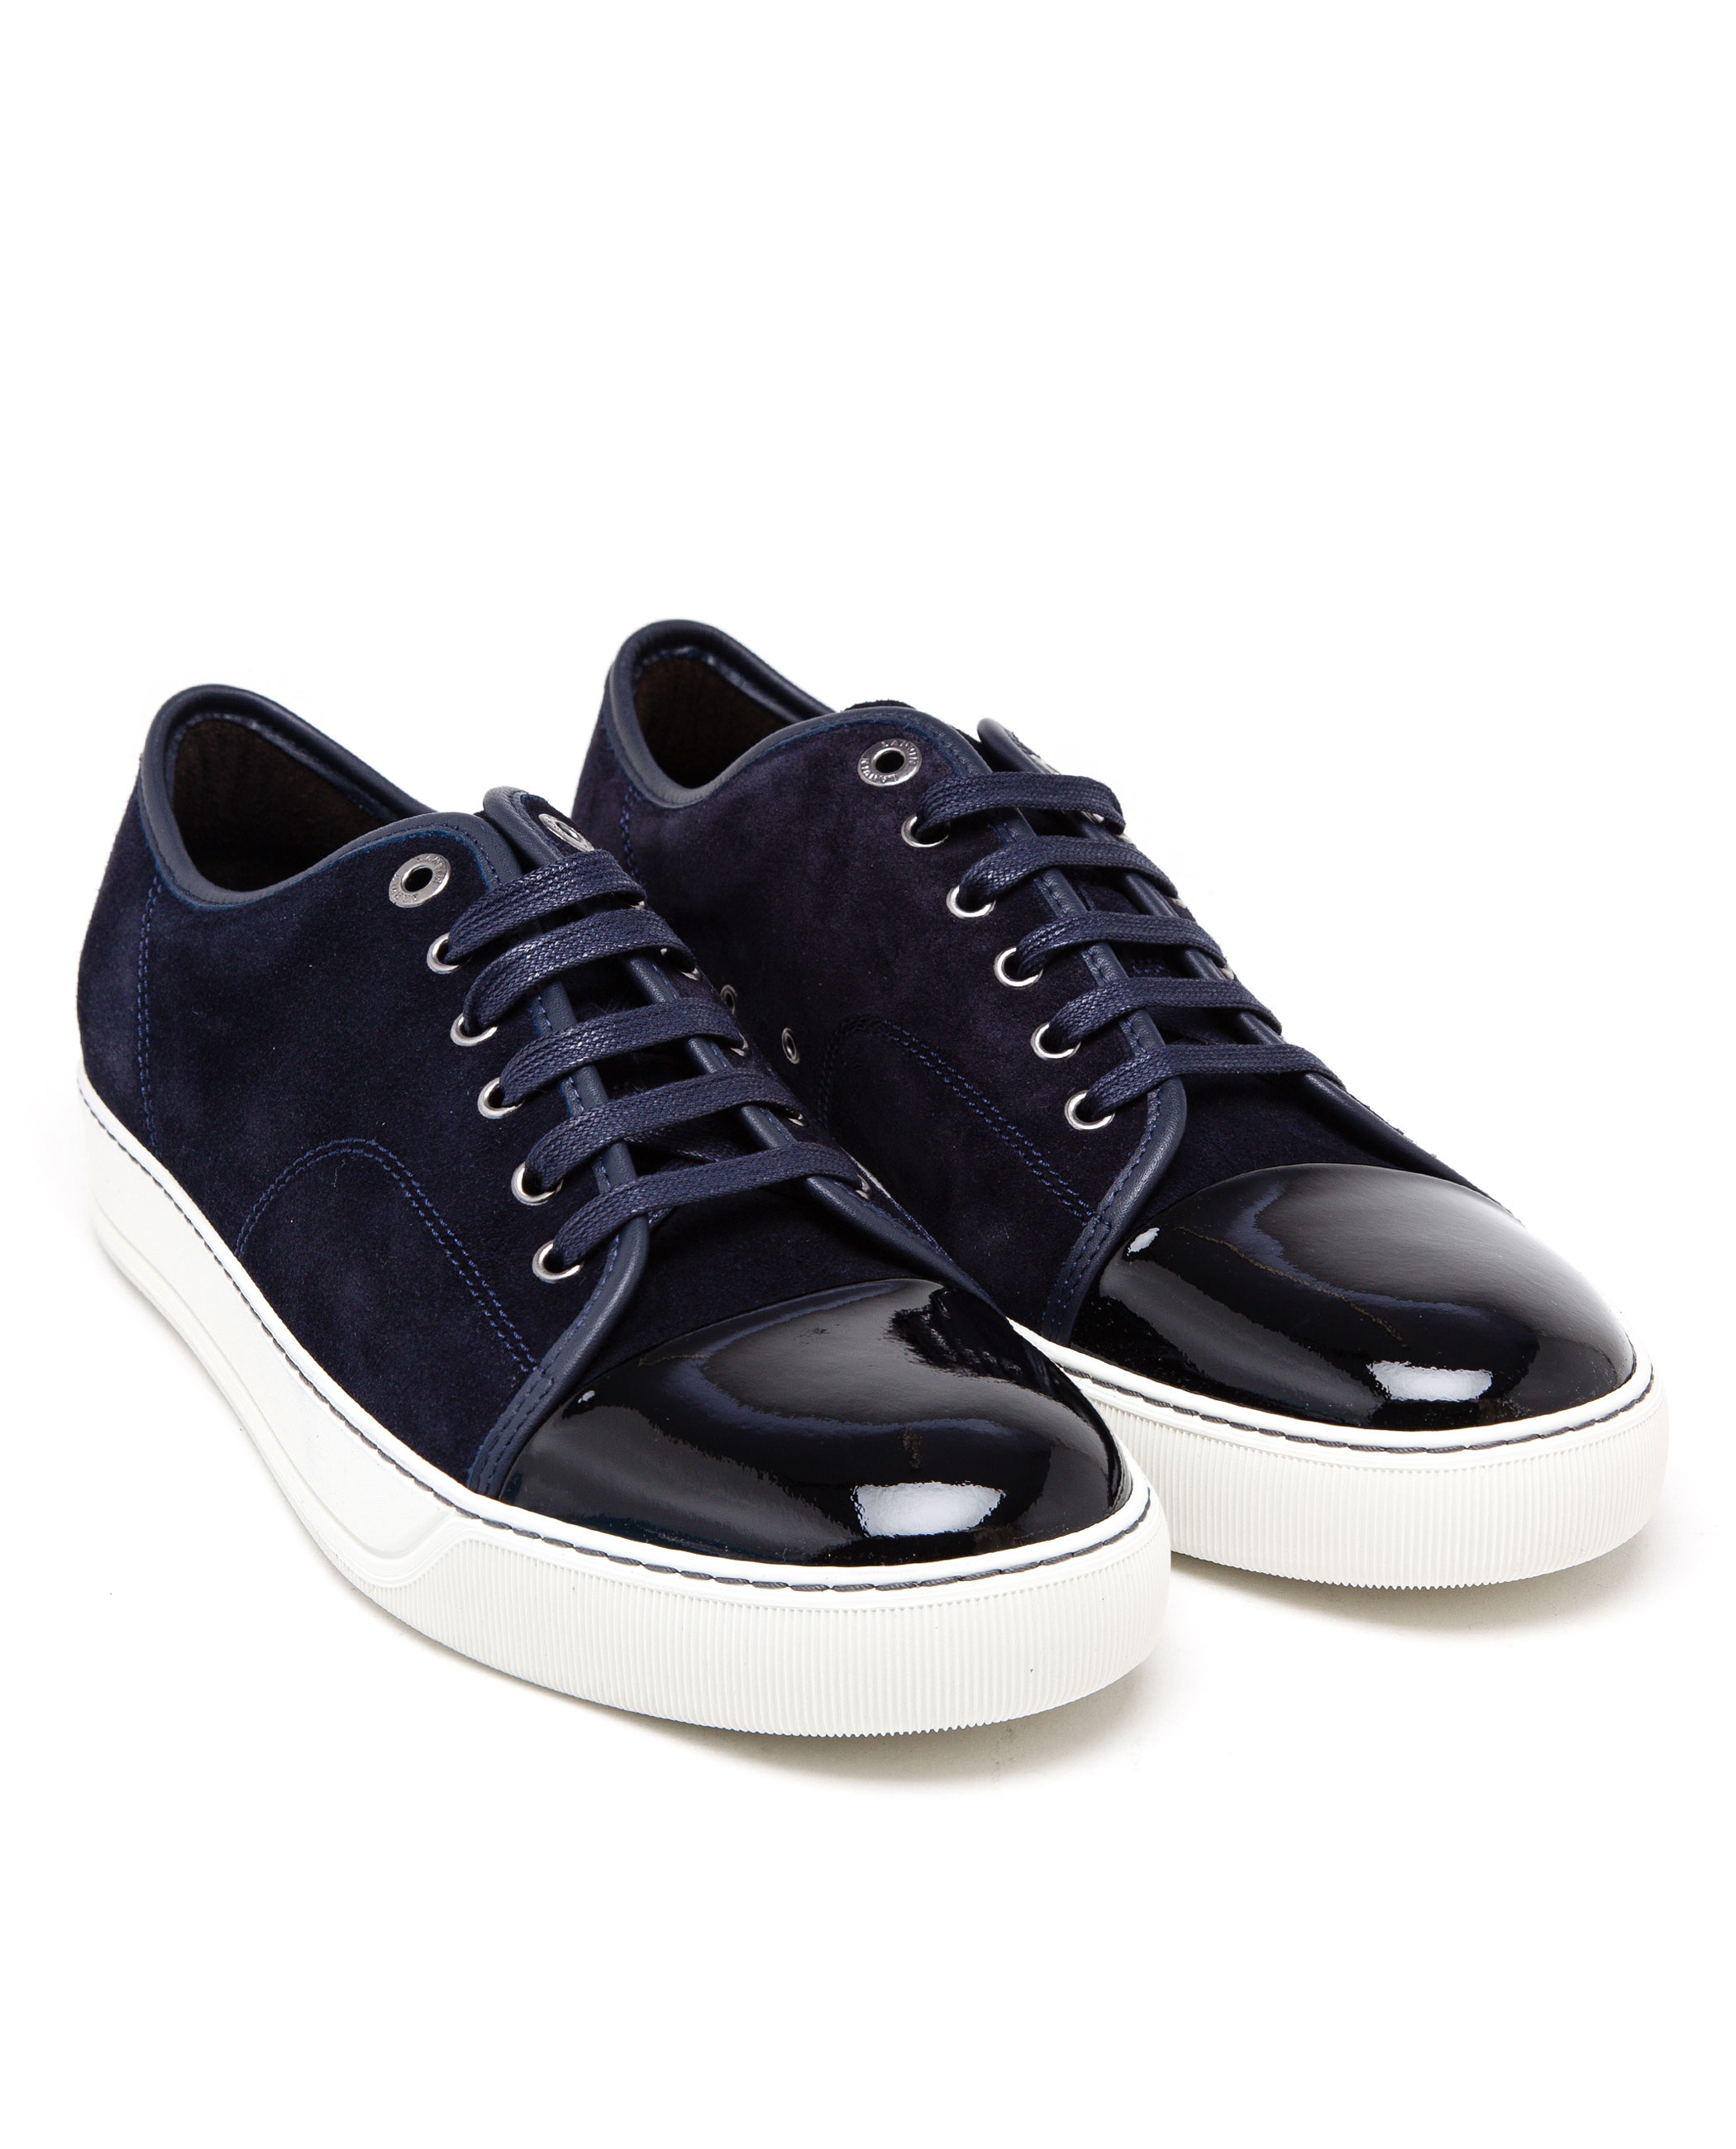 lanvin patent leather sneakers 